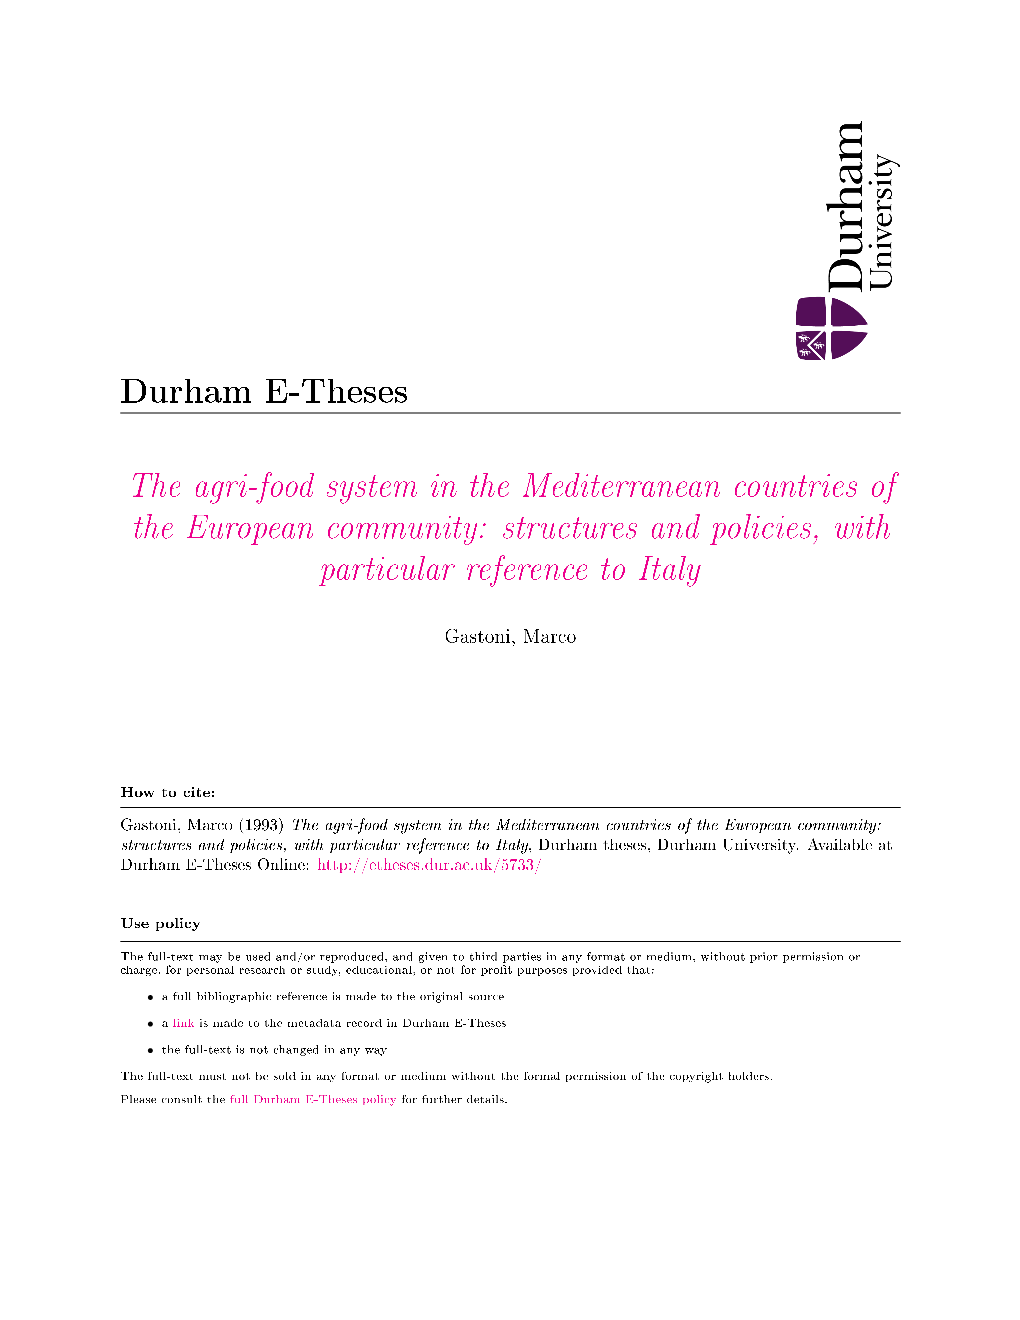 The Agri-Food System in the Mediterranean Countries of the European Community: Structures and Policies, with Particular Reference to Italy